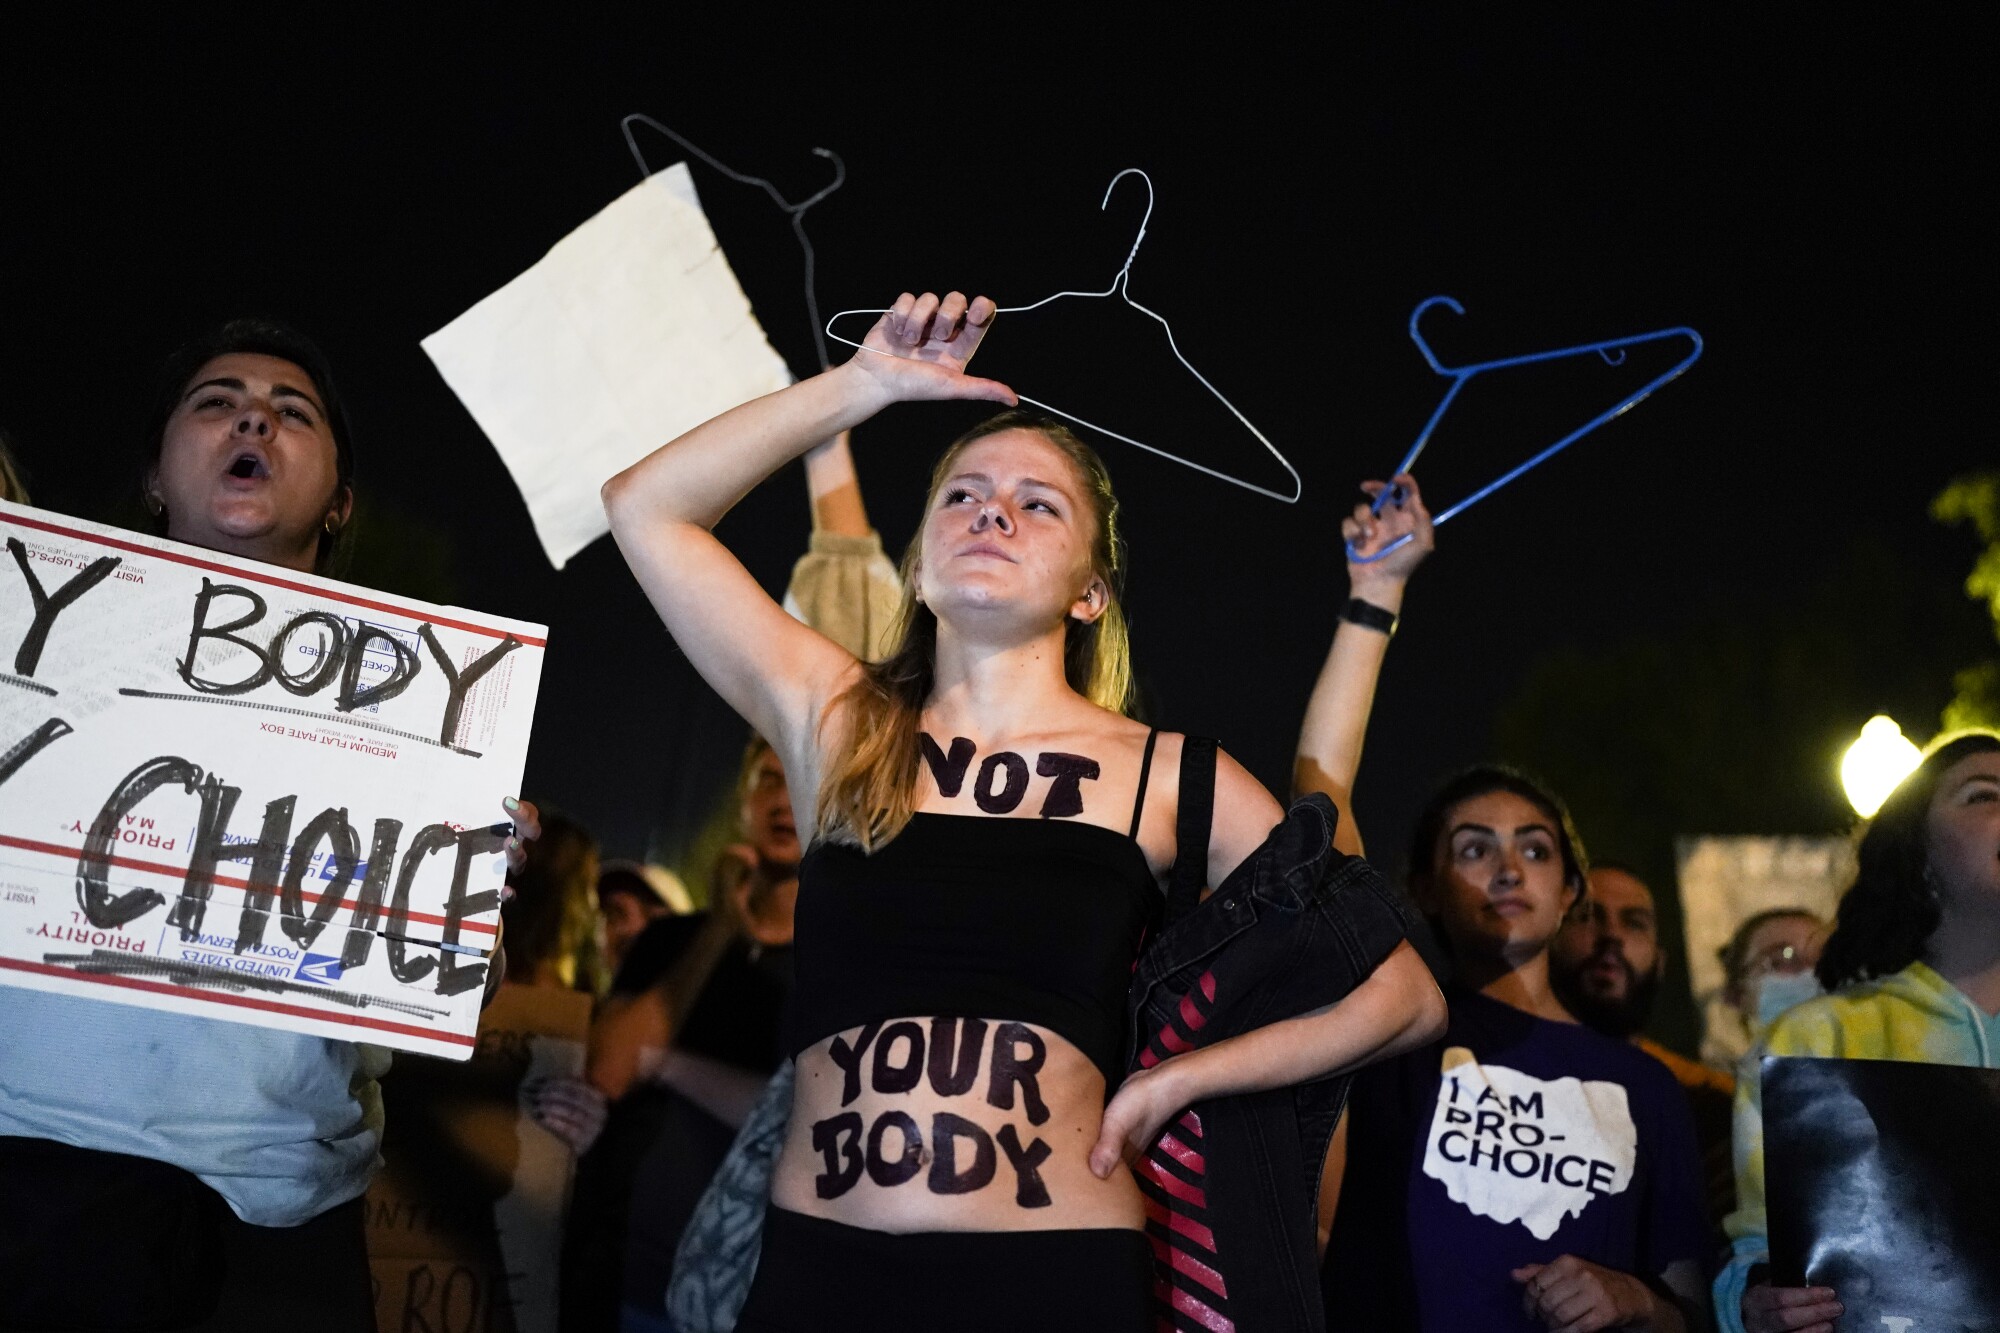 A protester with "Not your body" painted on her body holds up clothes hangers with other protesters